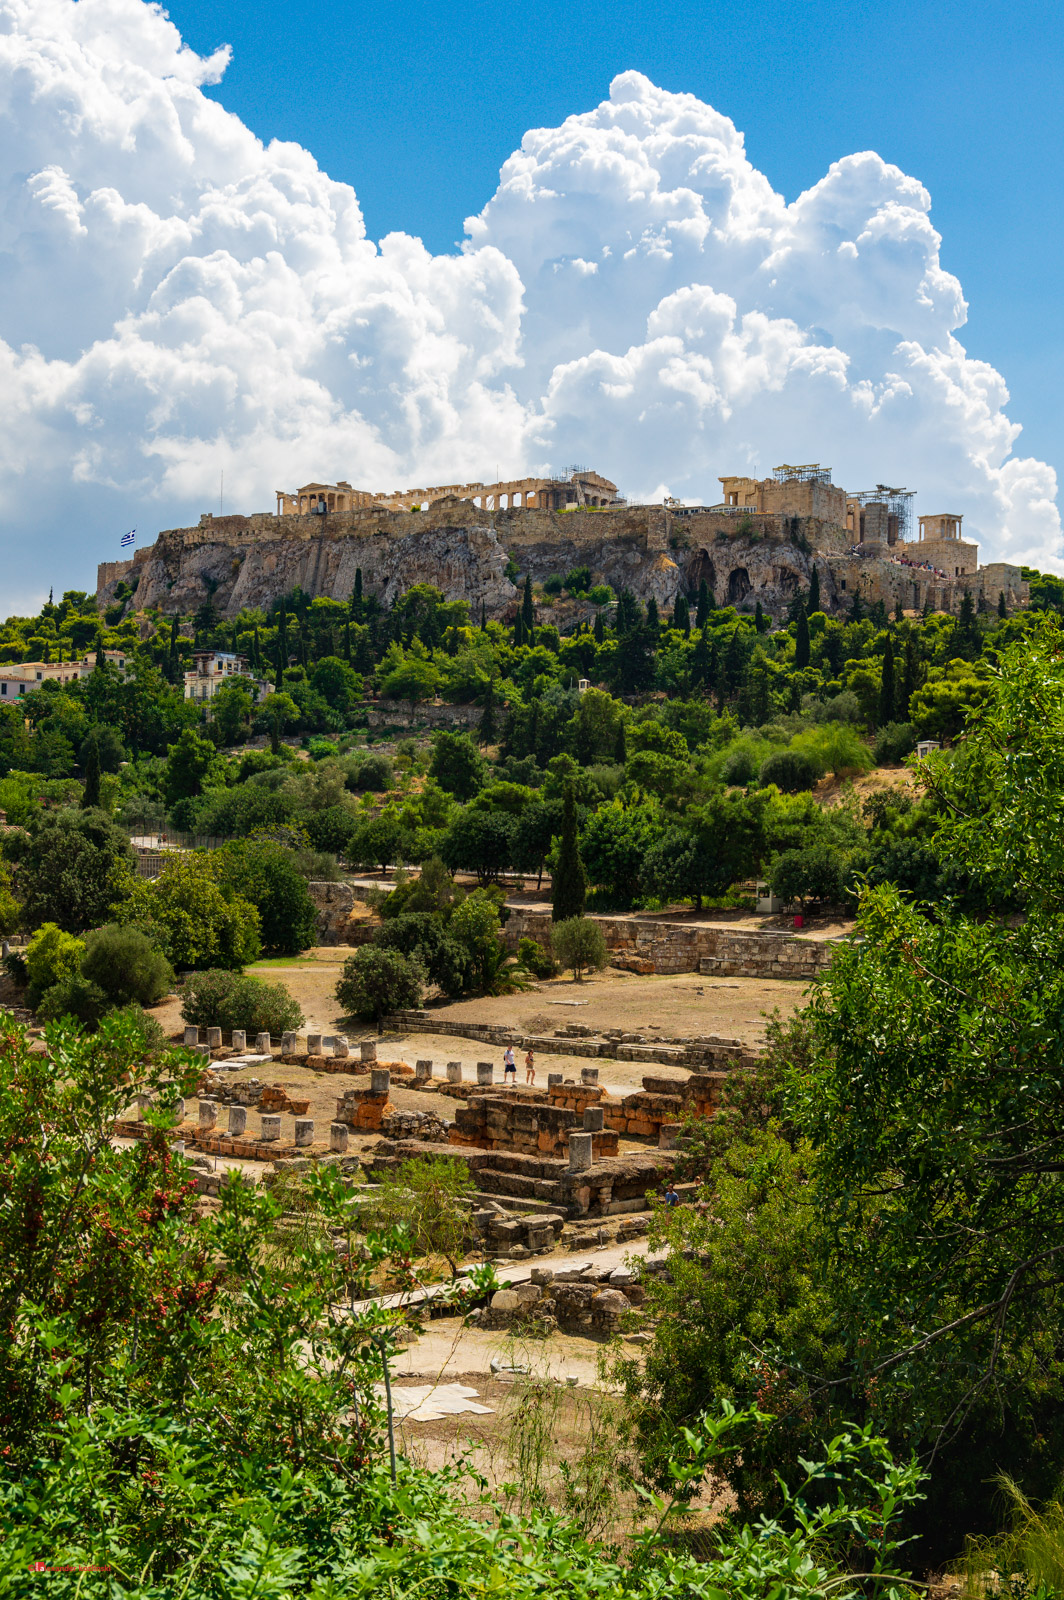 View of the Acropolis from the Ancient Agora